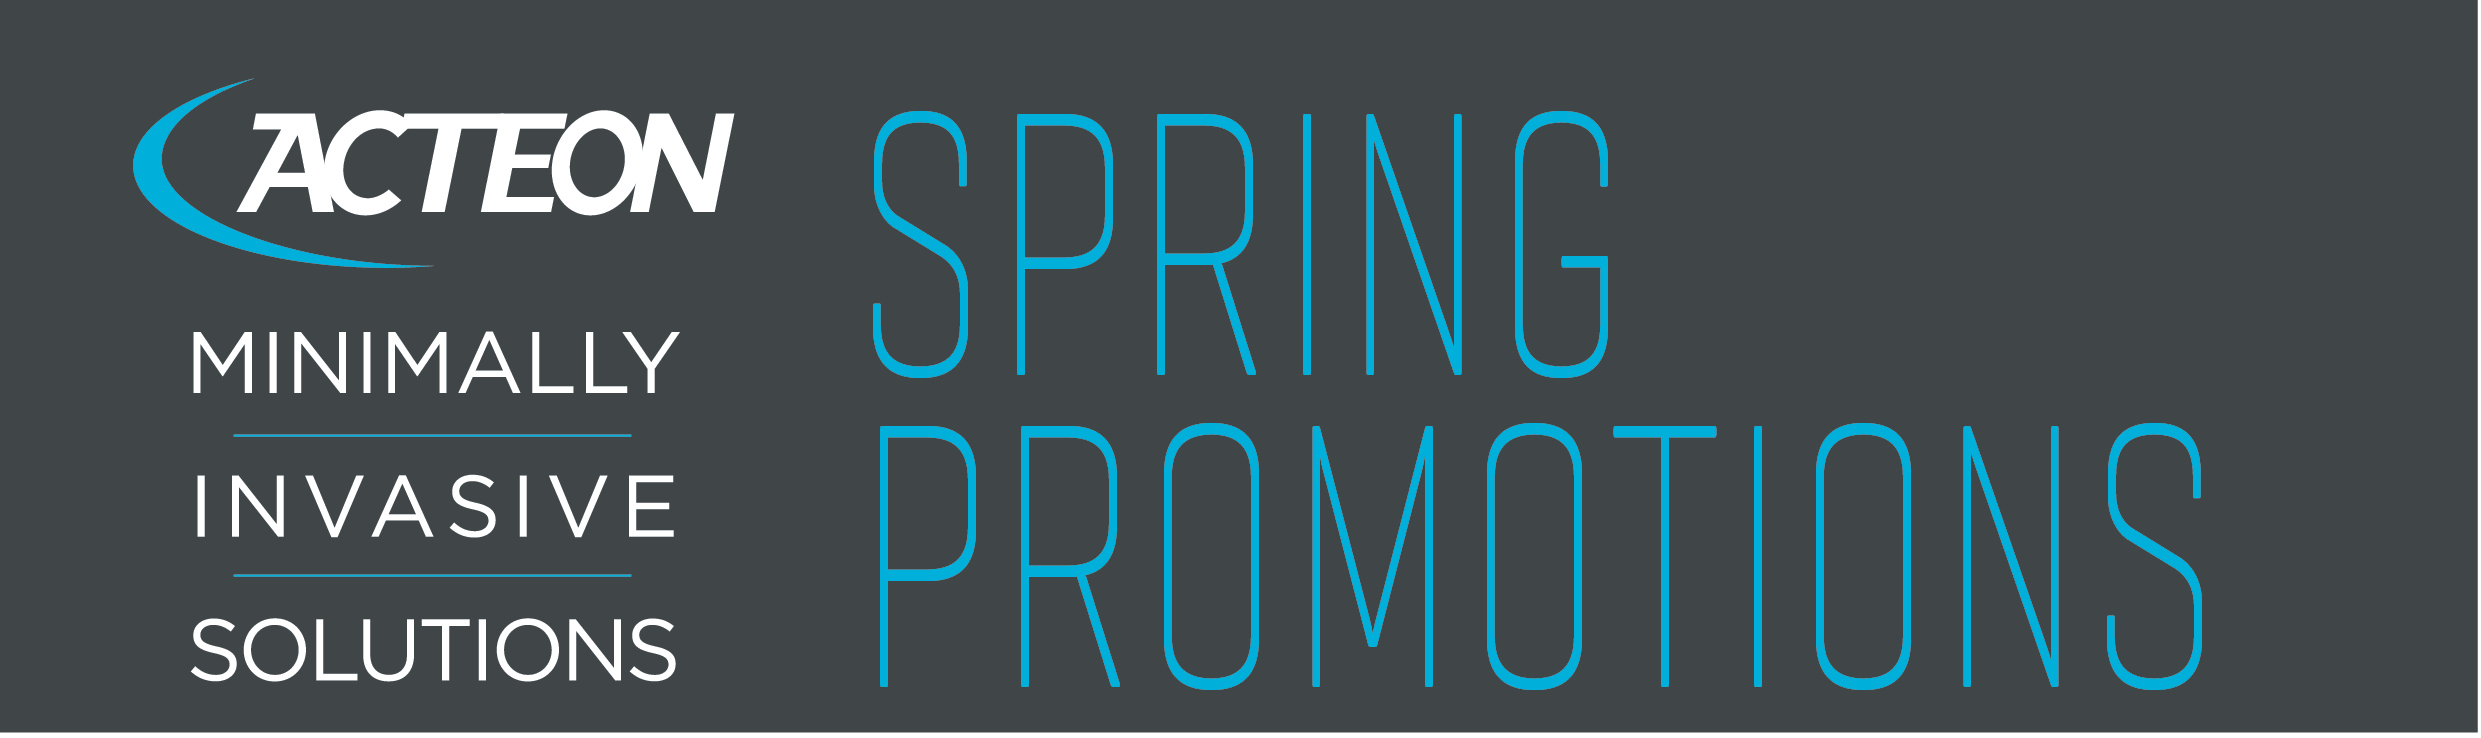 acteon spring promotions